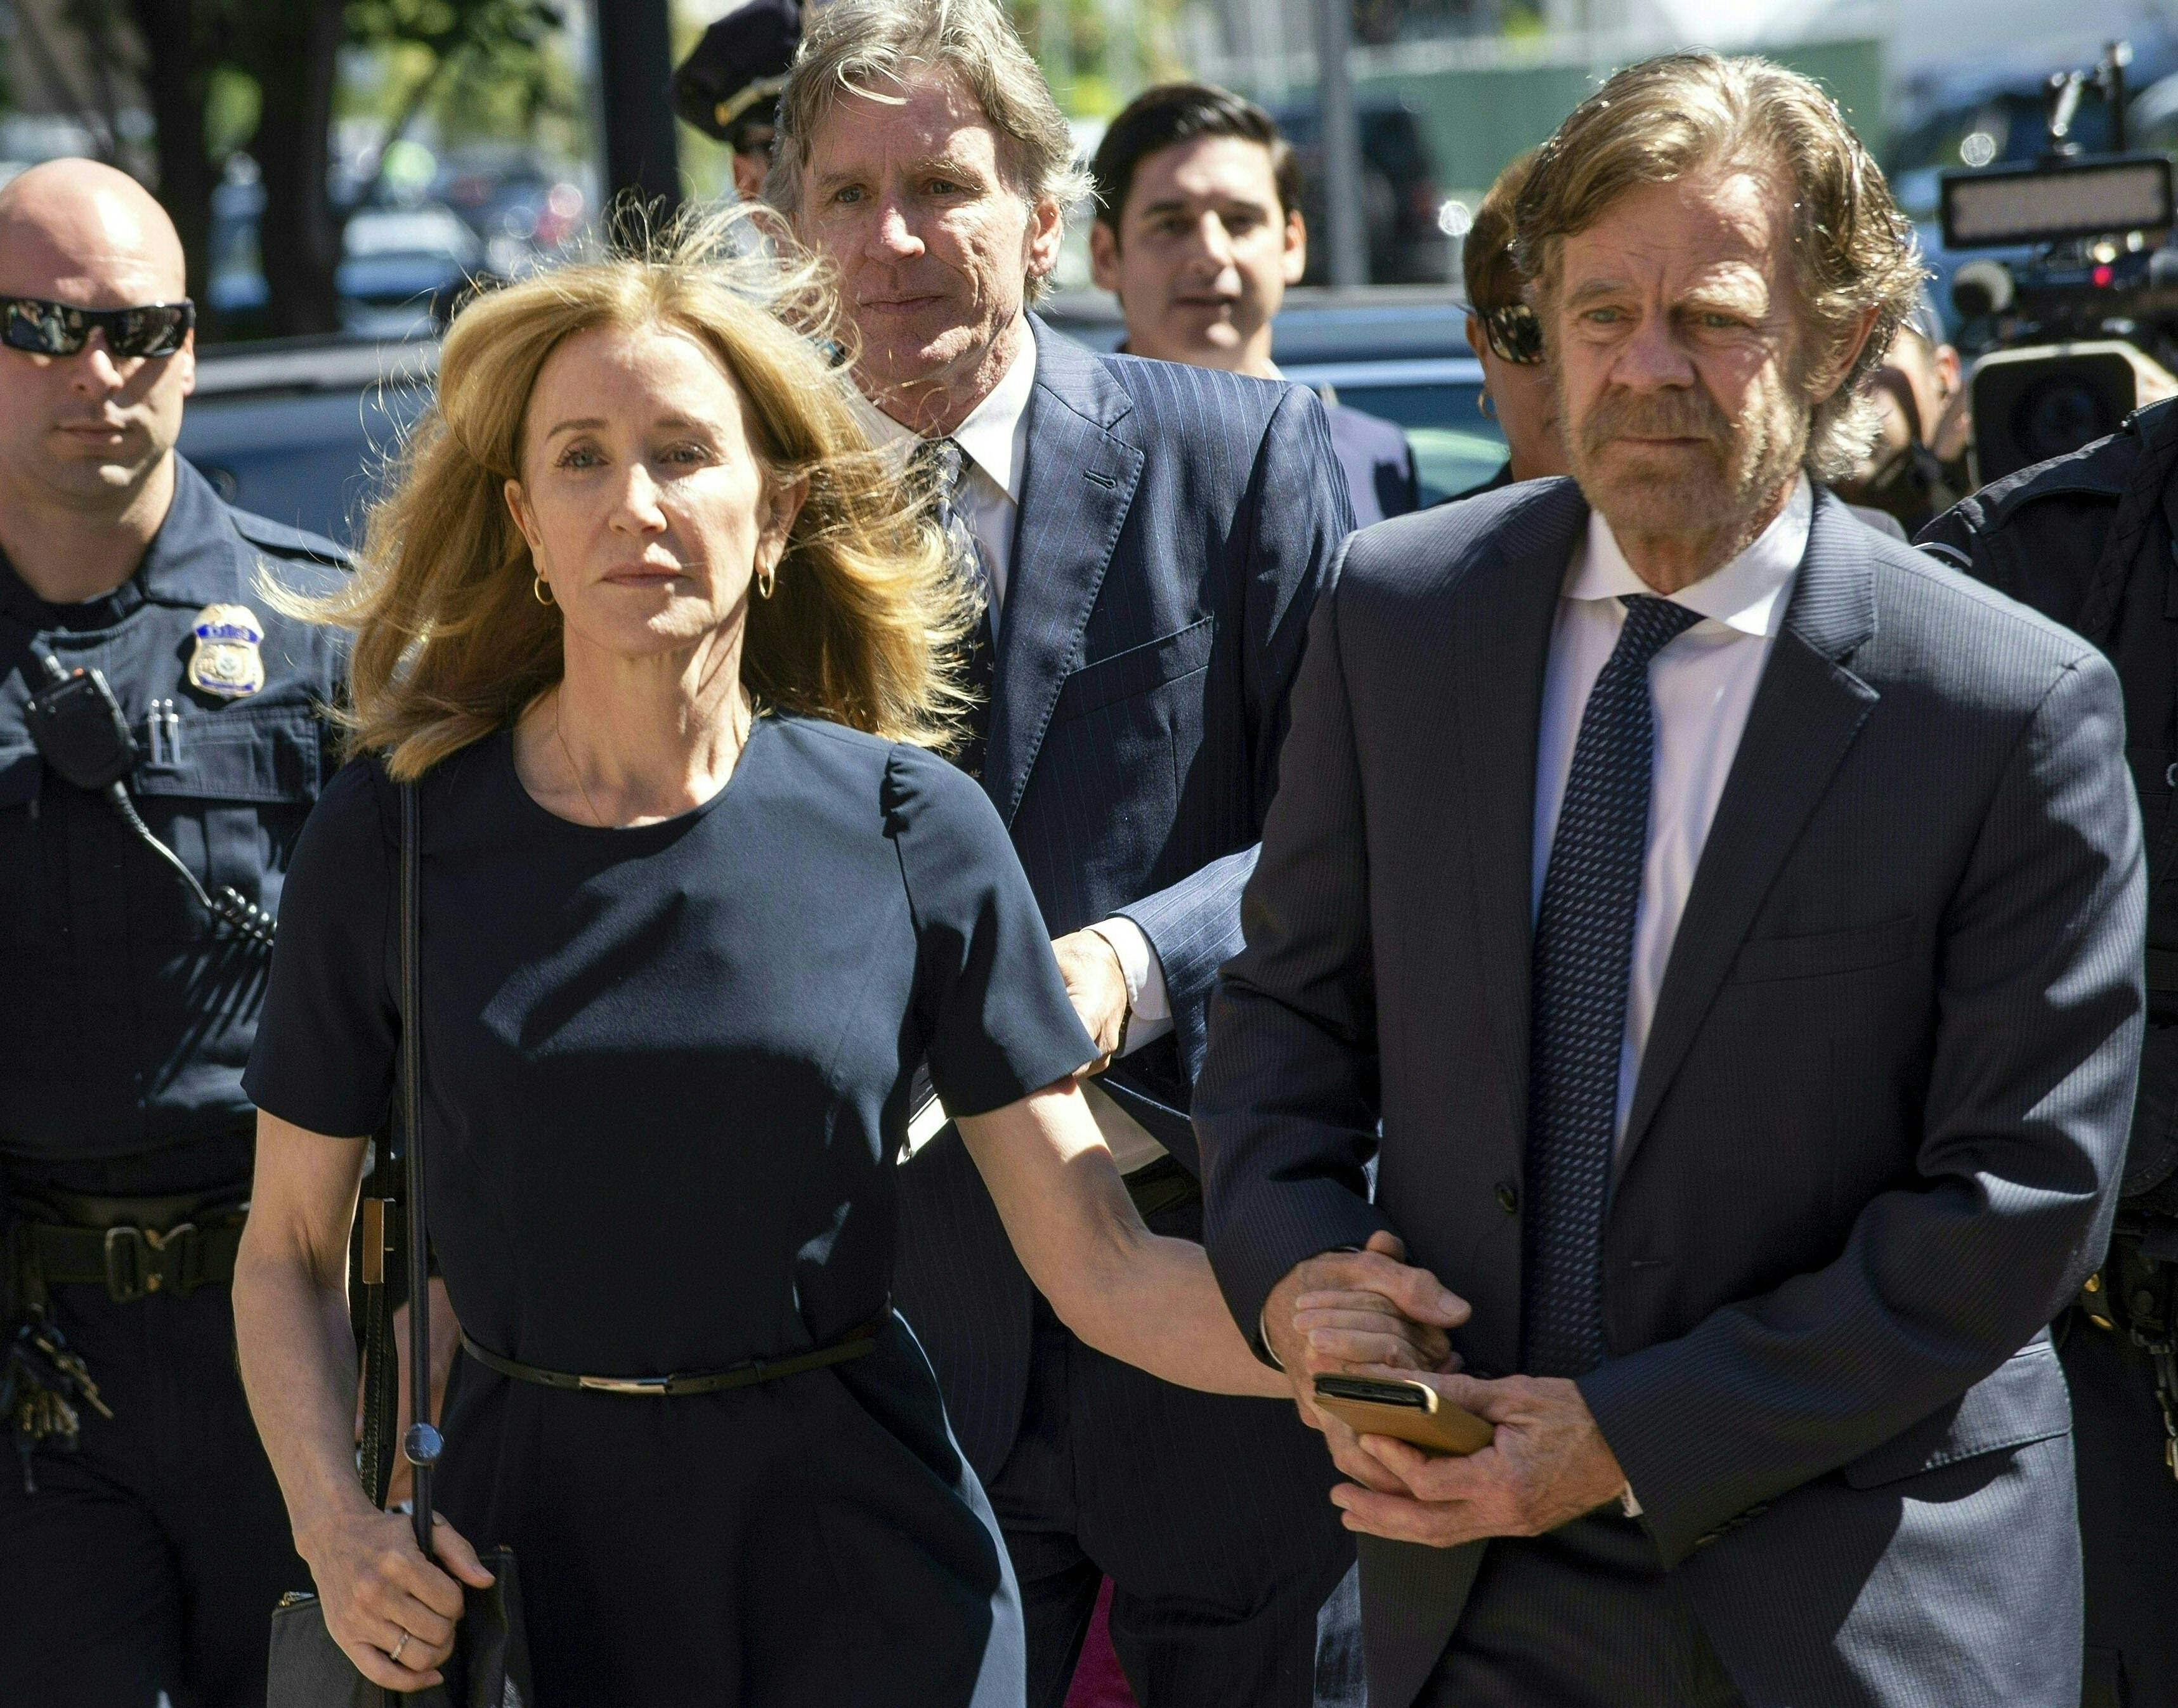 Actress Felicity Huffman, escorted by husband William H. Macy, makes her way to the courthouse entrance in Boston on Friday. Photo: AFP